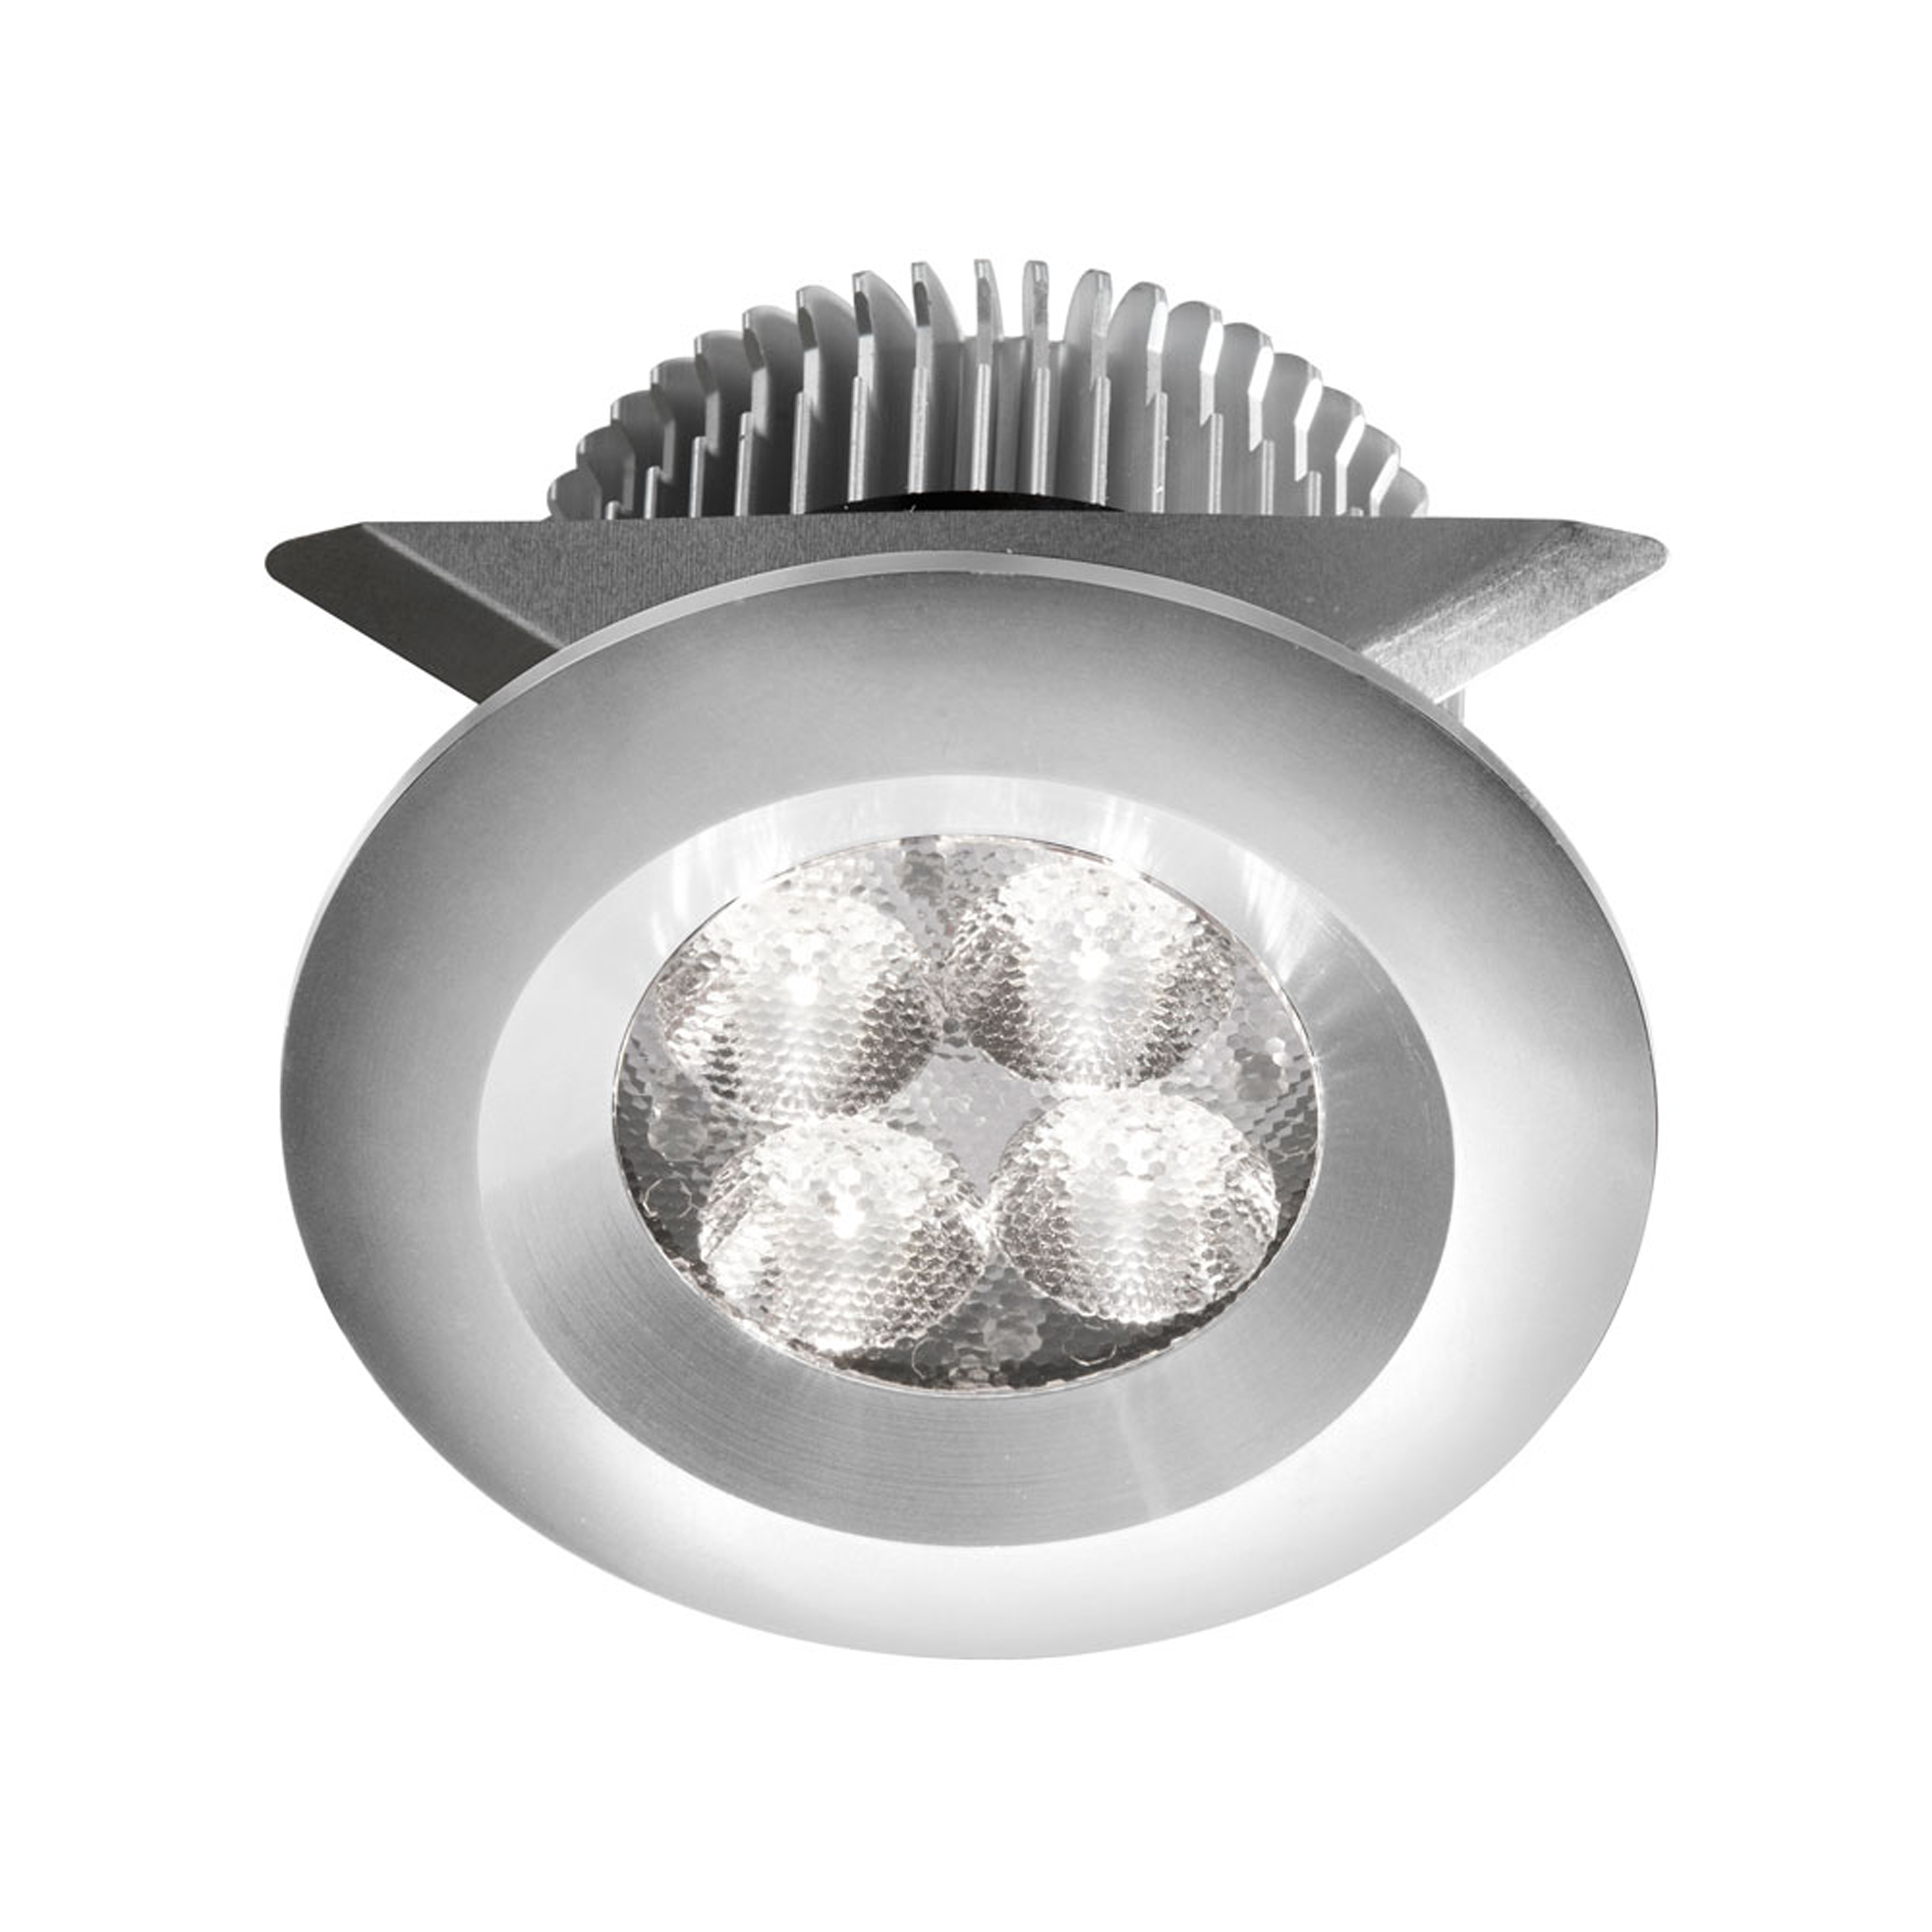 Aluminum 2x4W 3000K, CRI80+, 25° beam, 24VDC input with Male Connector, 18" Lead wire, D70xH50 mm, Dimmable.